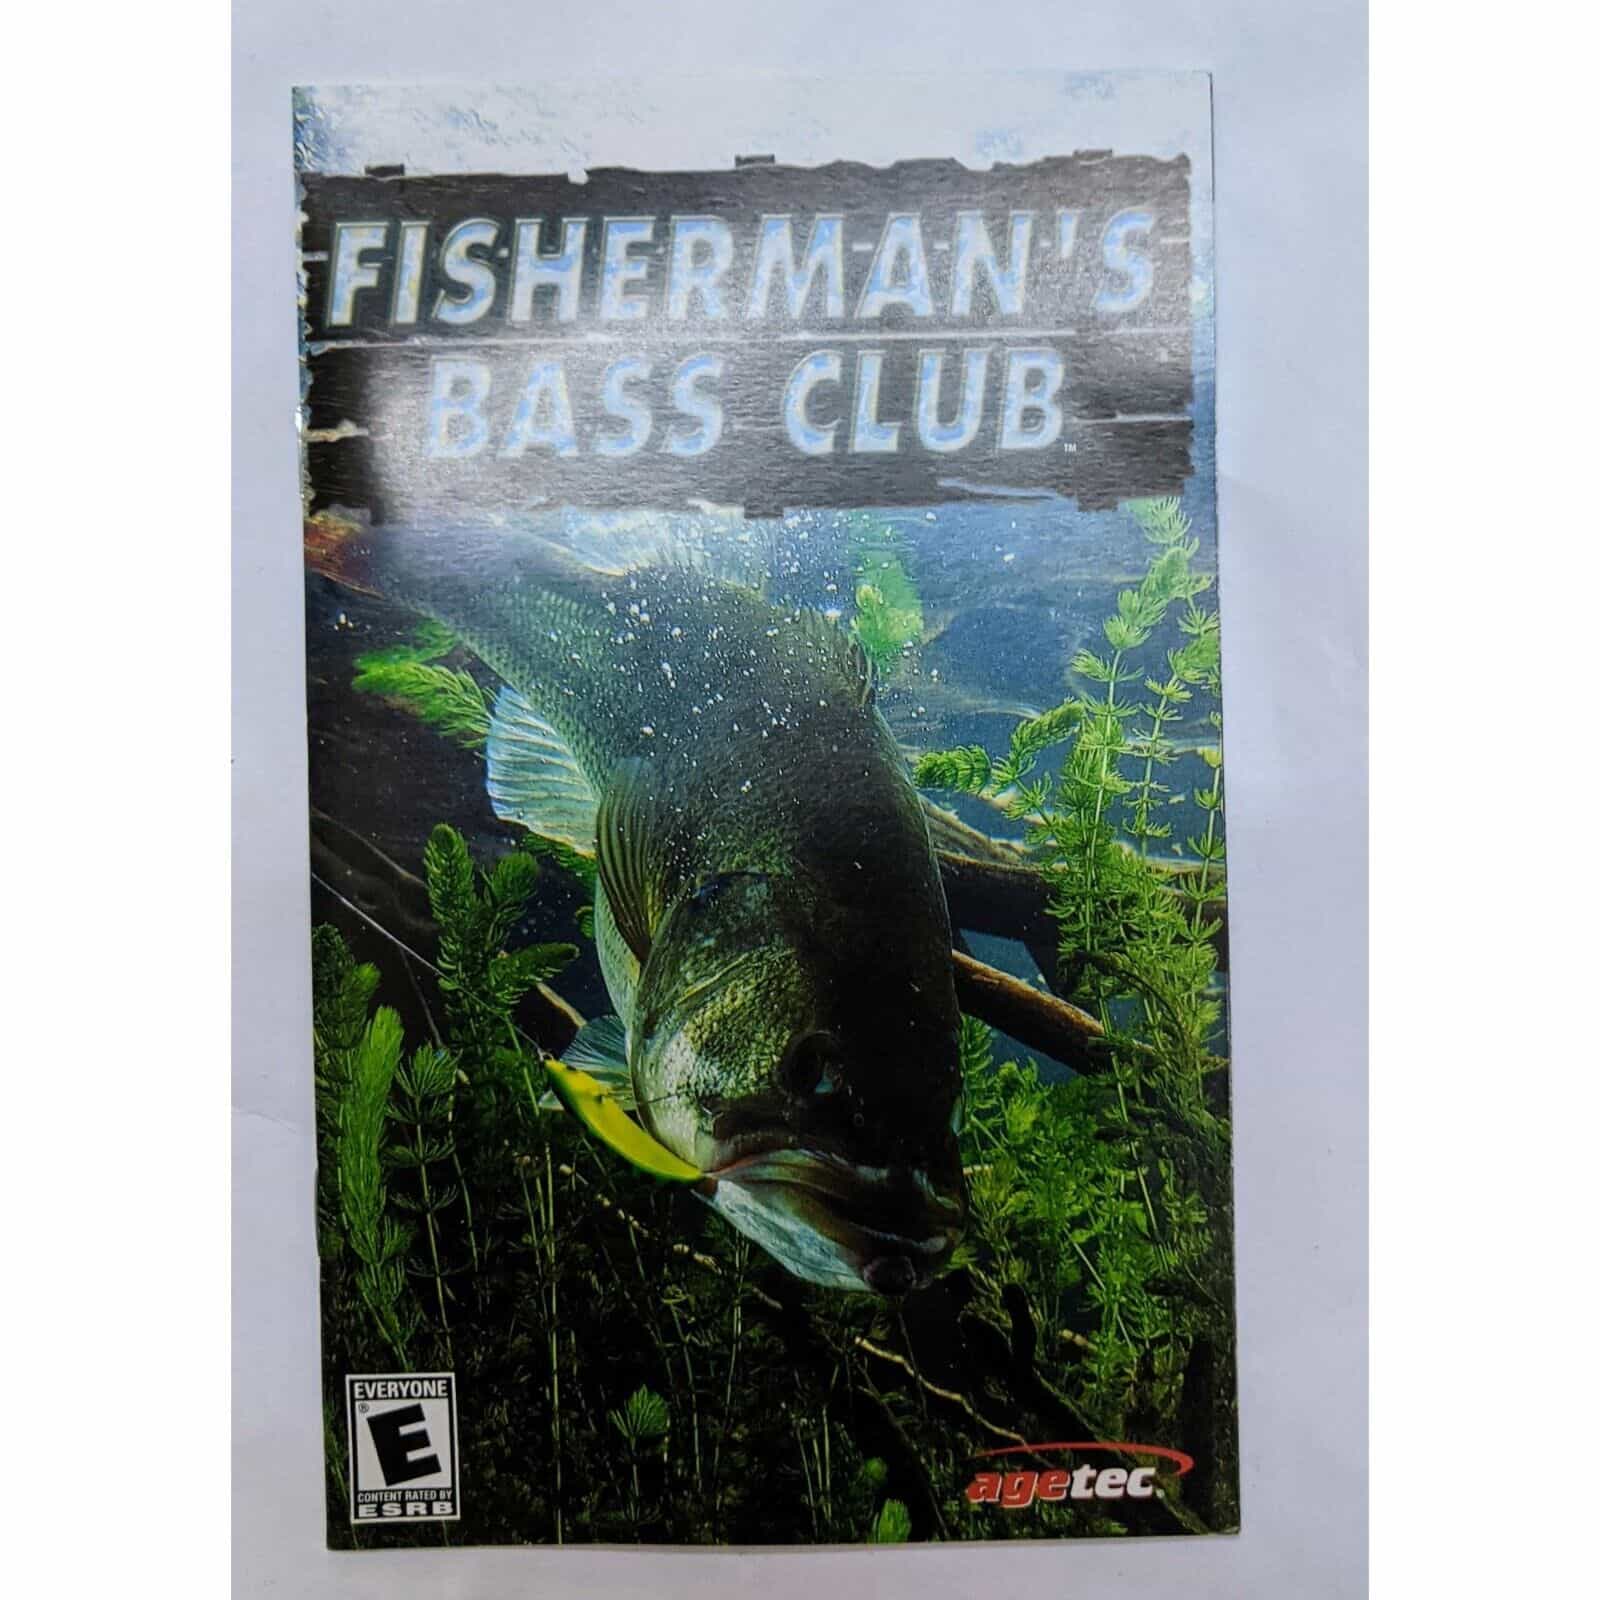 Fisherman’s Bass Club Game Manual for the PlayStation 2